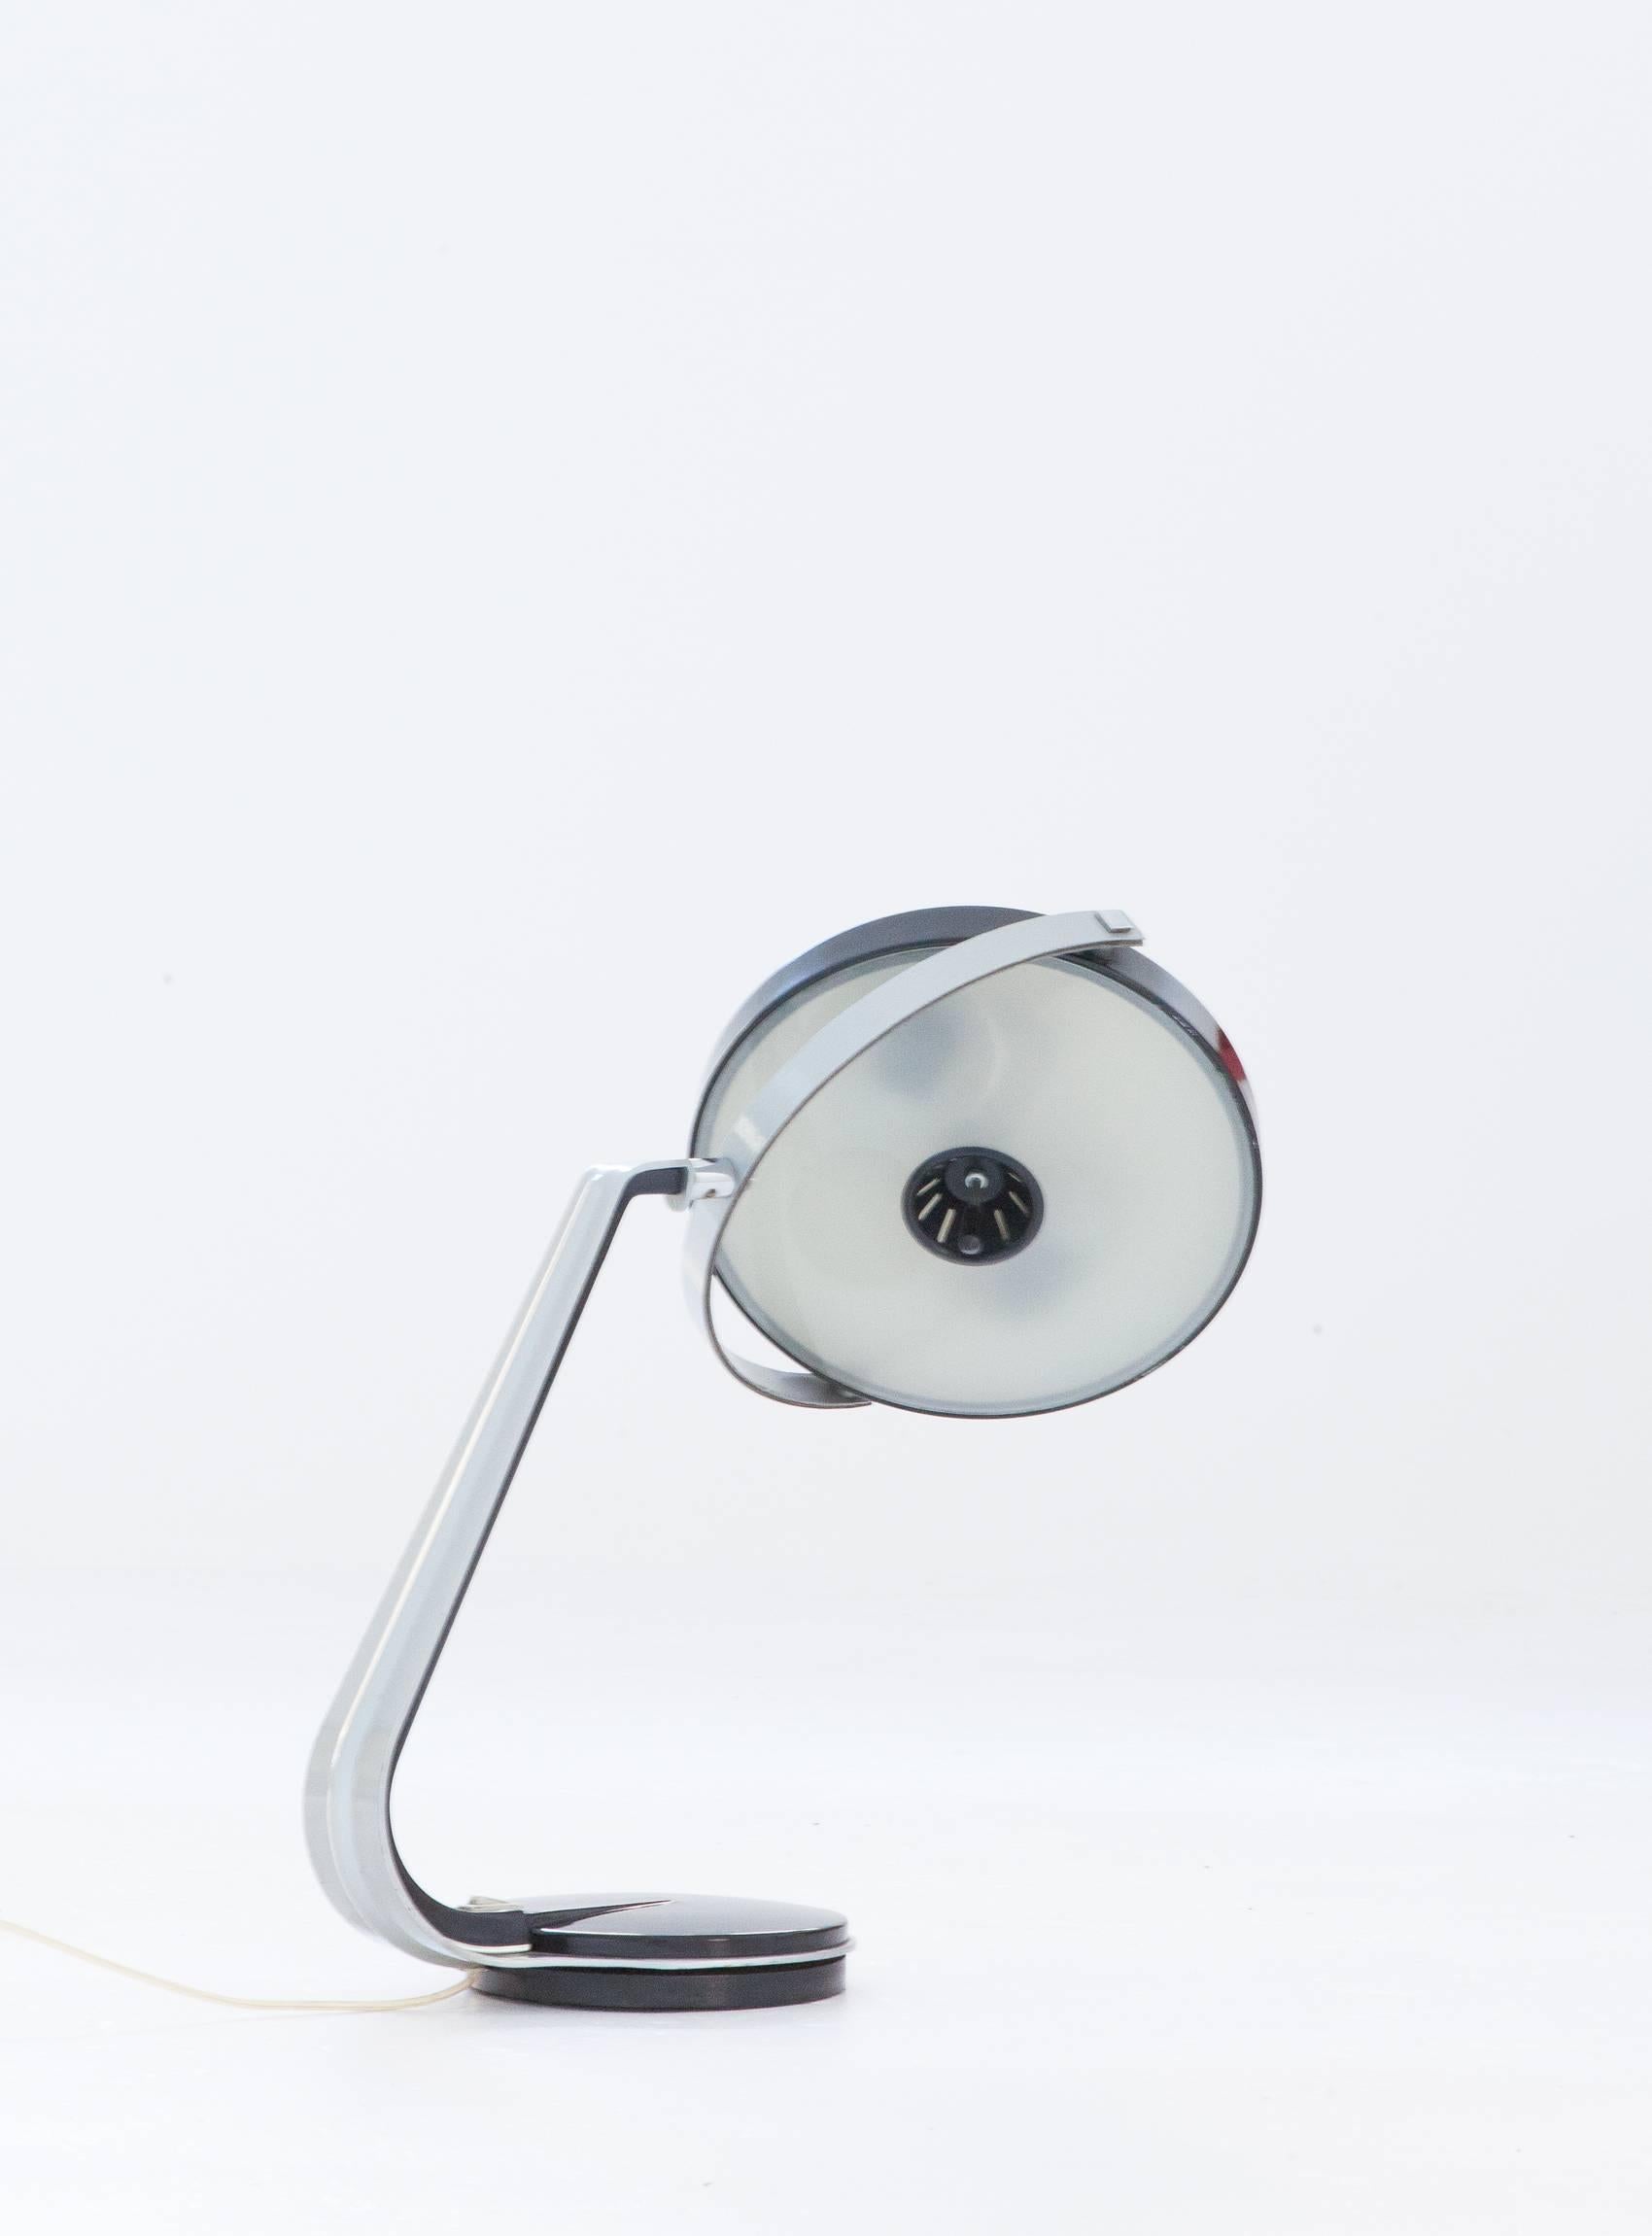 Mid-Century Modern Table lamp by Lupela, Spain, 1960s